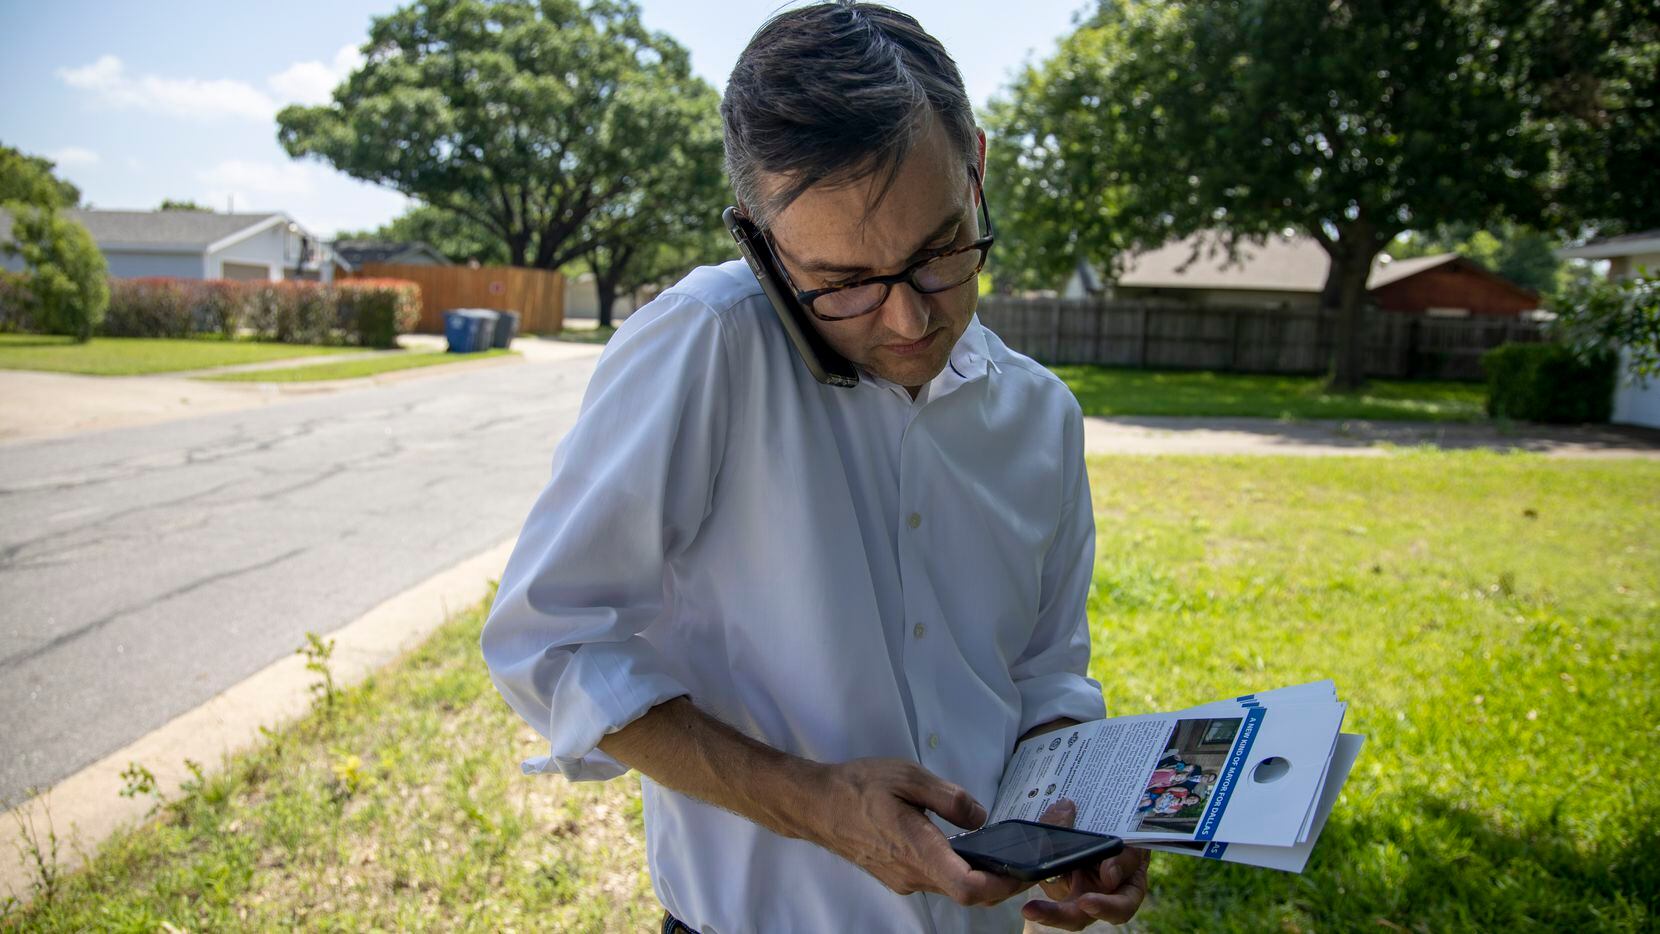 Mayoral candidate Scott Griggs answers a call as he checks a voter database on a second smartphone while block-walking in Lake Highlands on Friday, May 24. (Shaban Athuman/Staff Photographer)